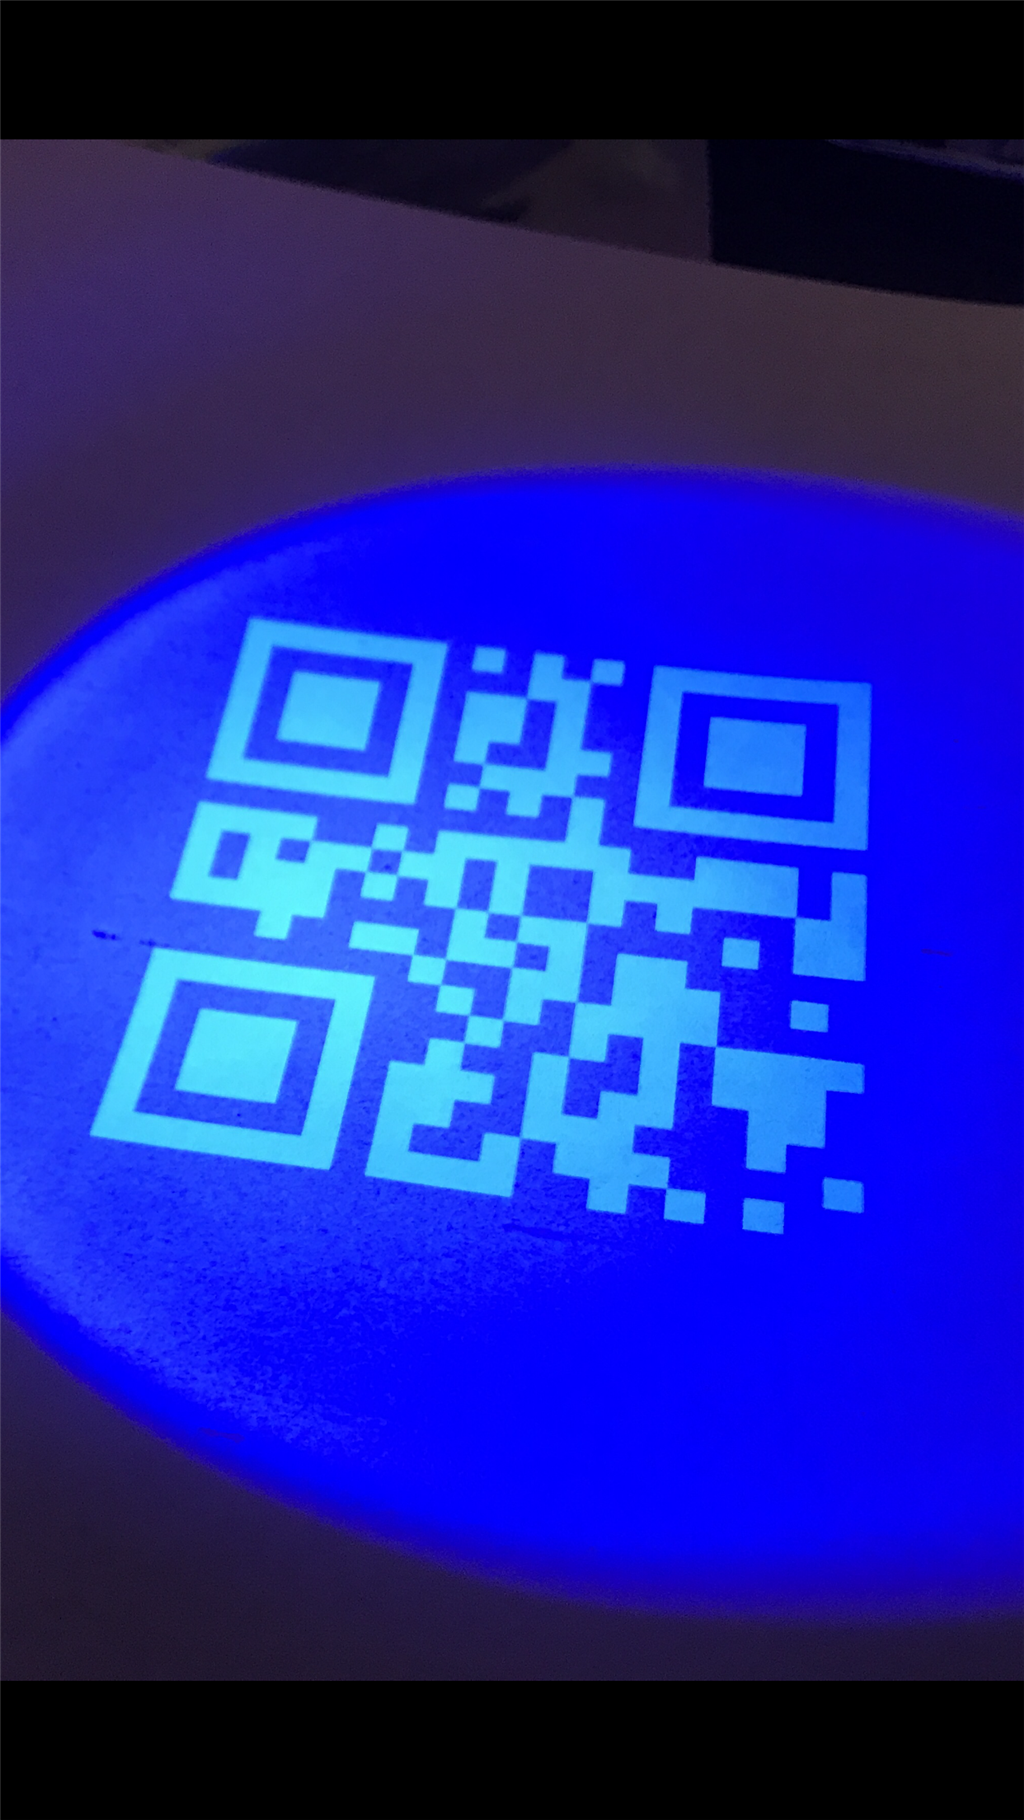 Jstarne1's Invisible Qr Code Project For Hackaday Competition